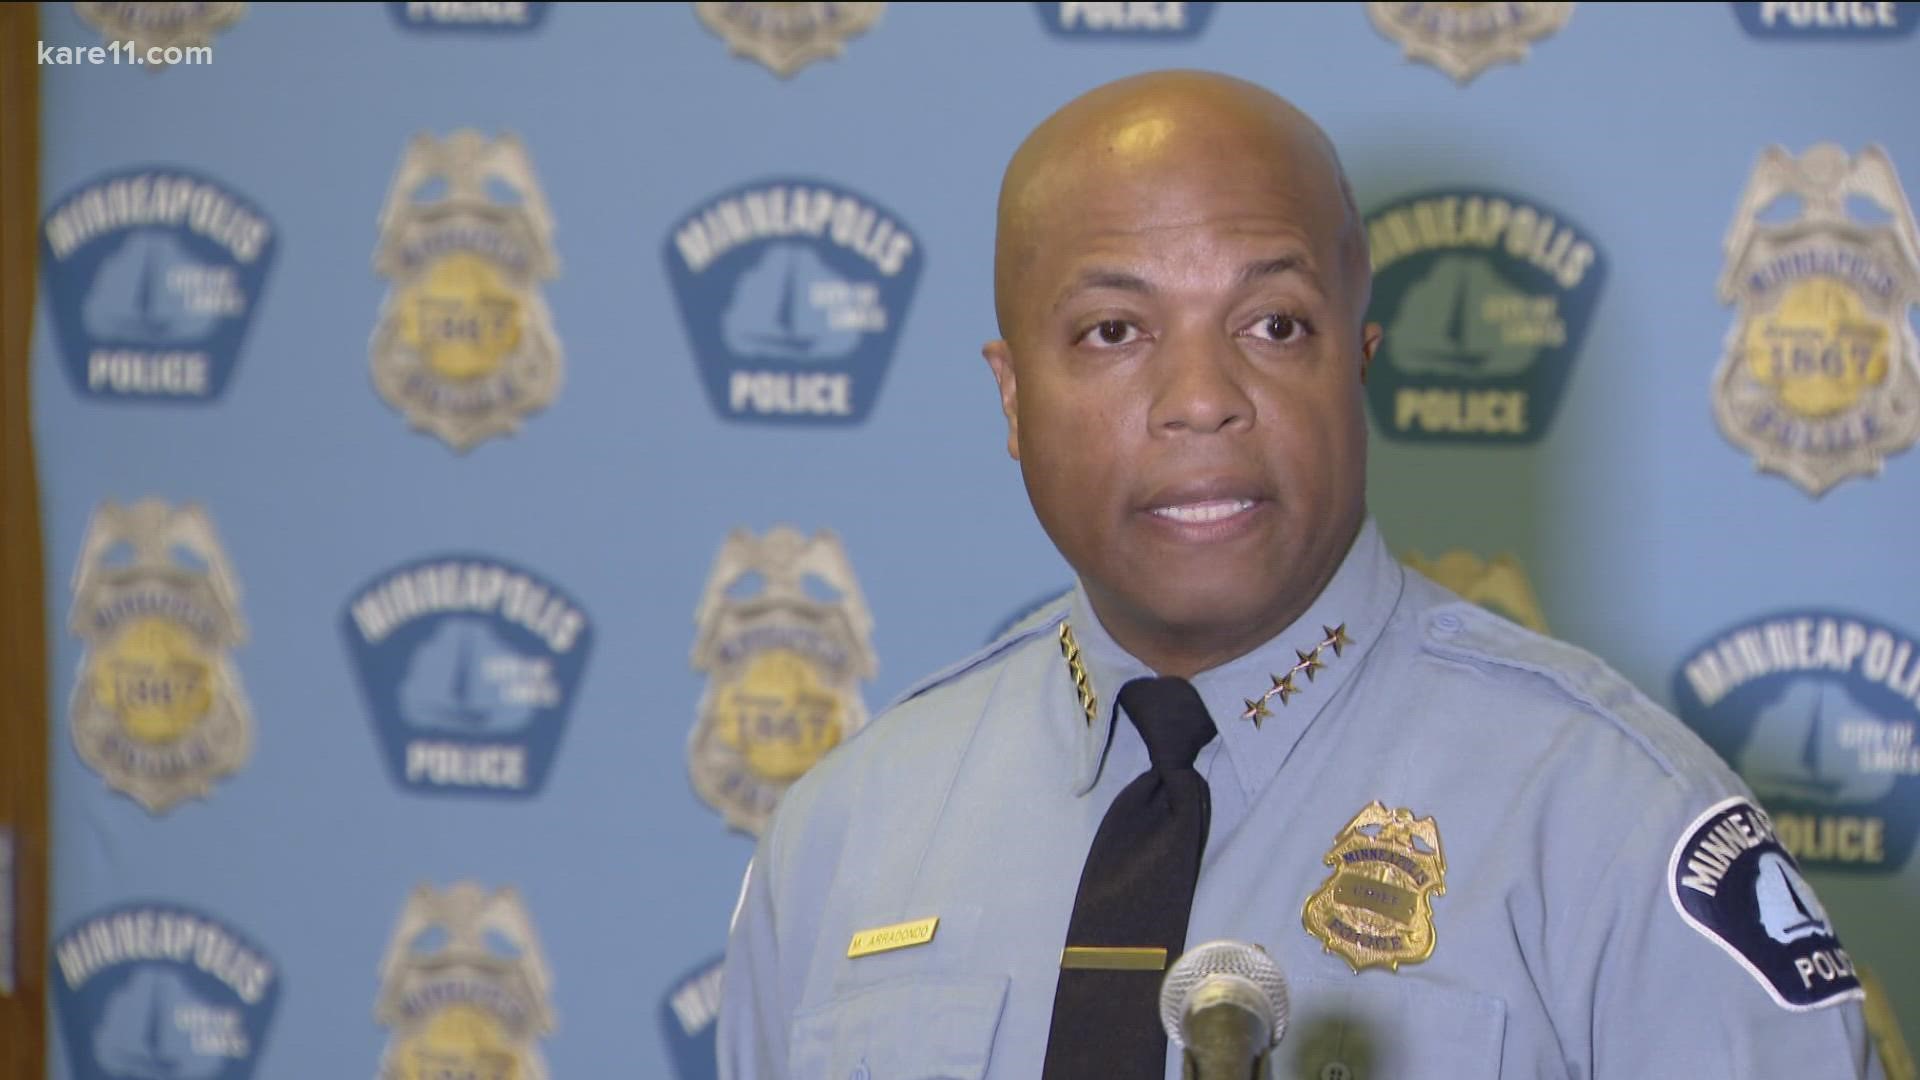 Less than a week before voters weigh in, Minneapolis Police Chief Medaria Arradondo is slamming a ballot question that would replace his department.